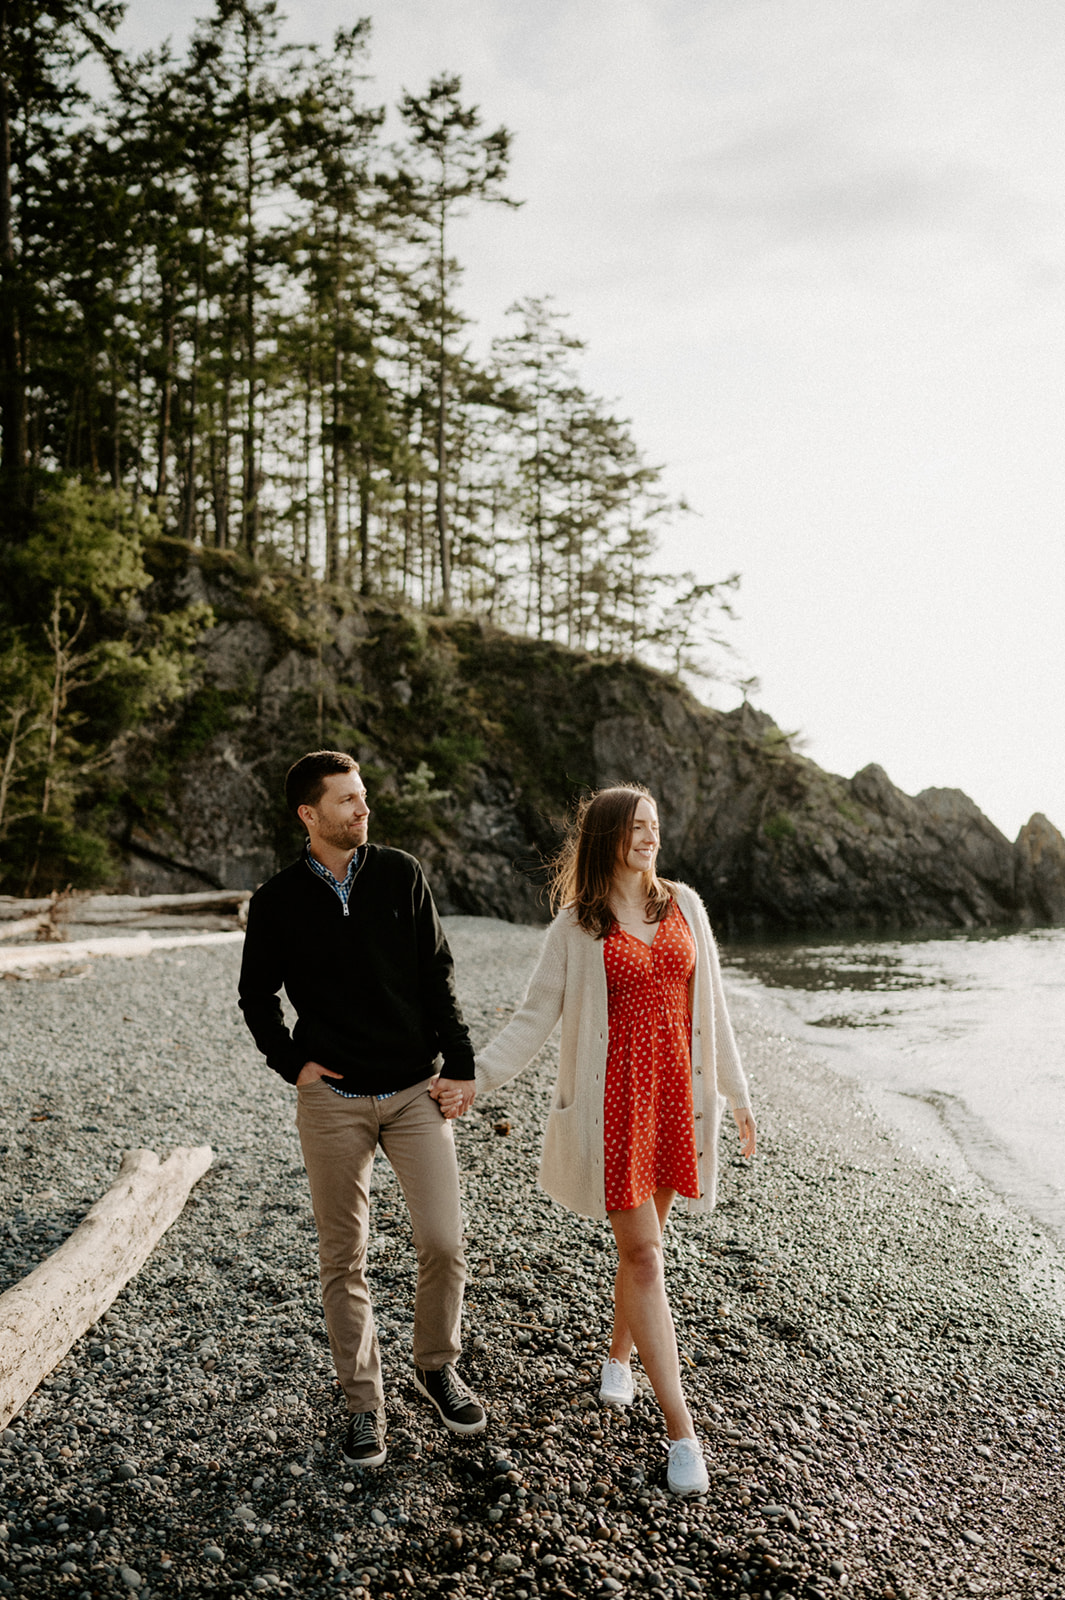 A couple walking hand in hand along a rocky beach, surrounded by trees and calm water.